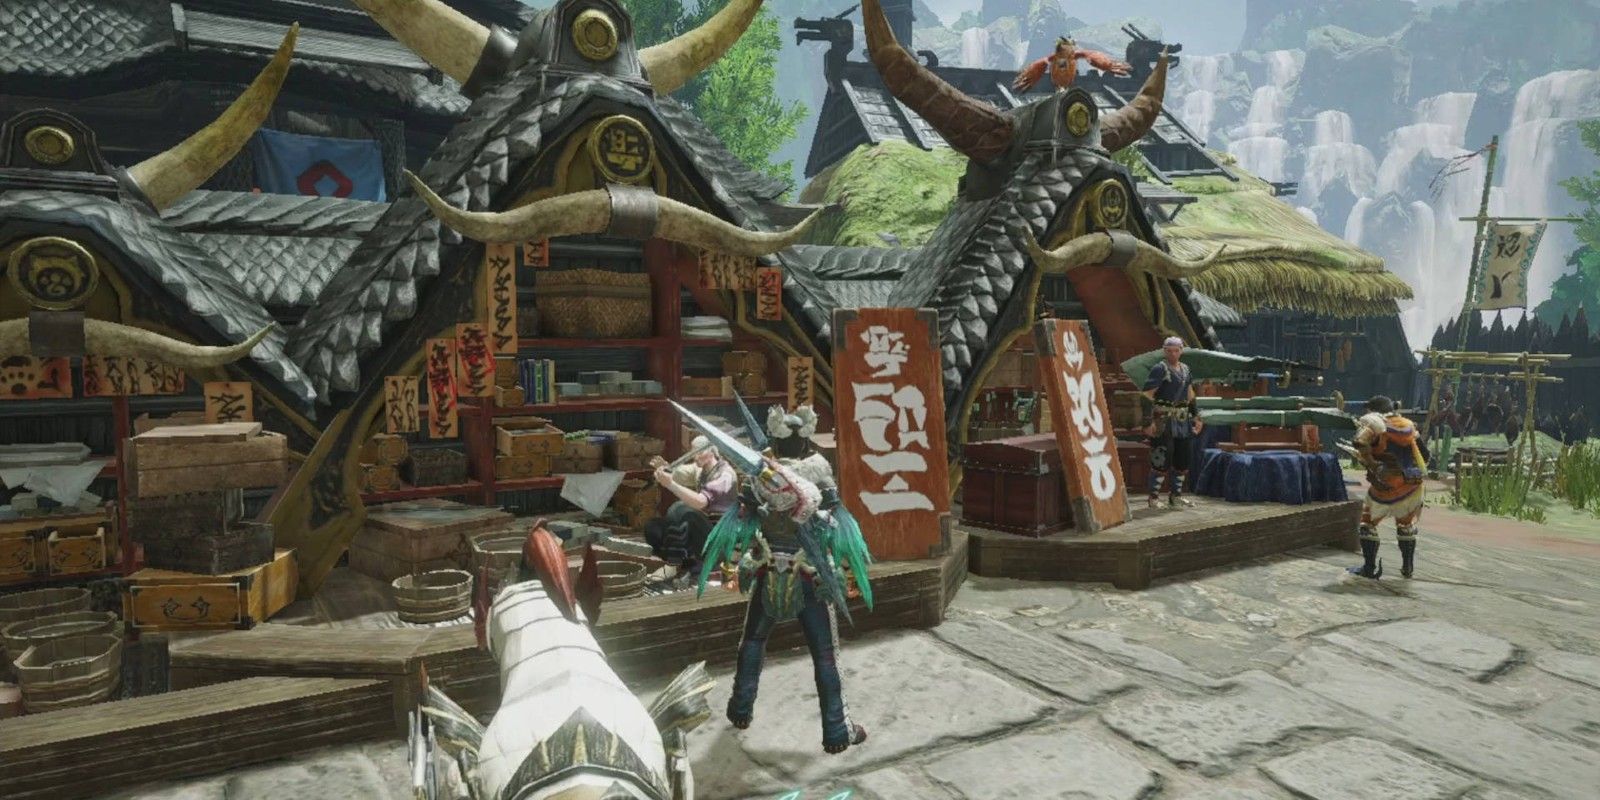 A player finds vendors for armor and weapons in Monster Hunter: Rise